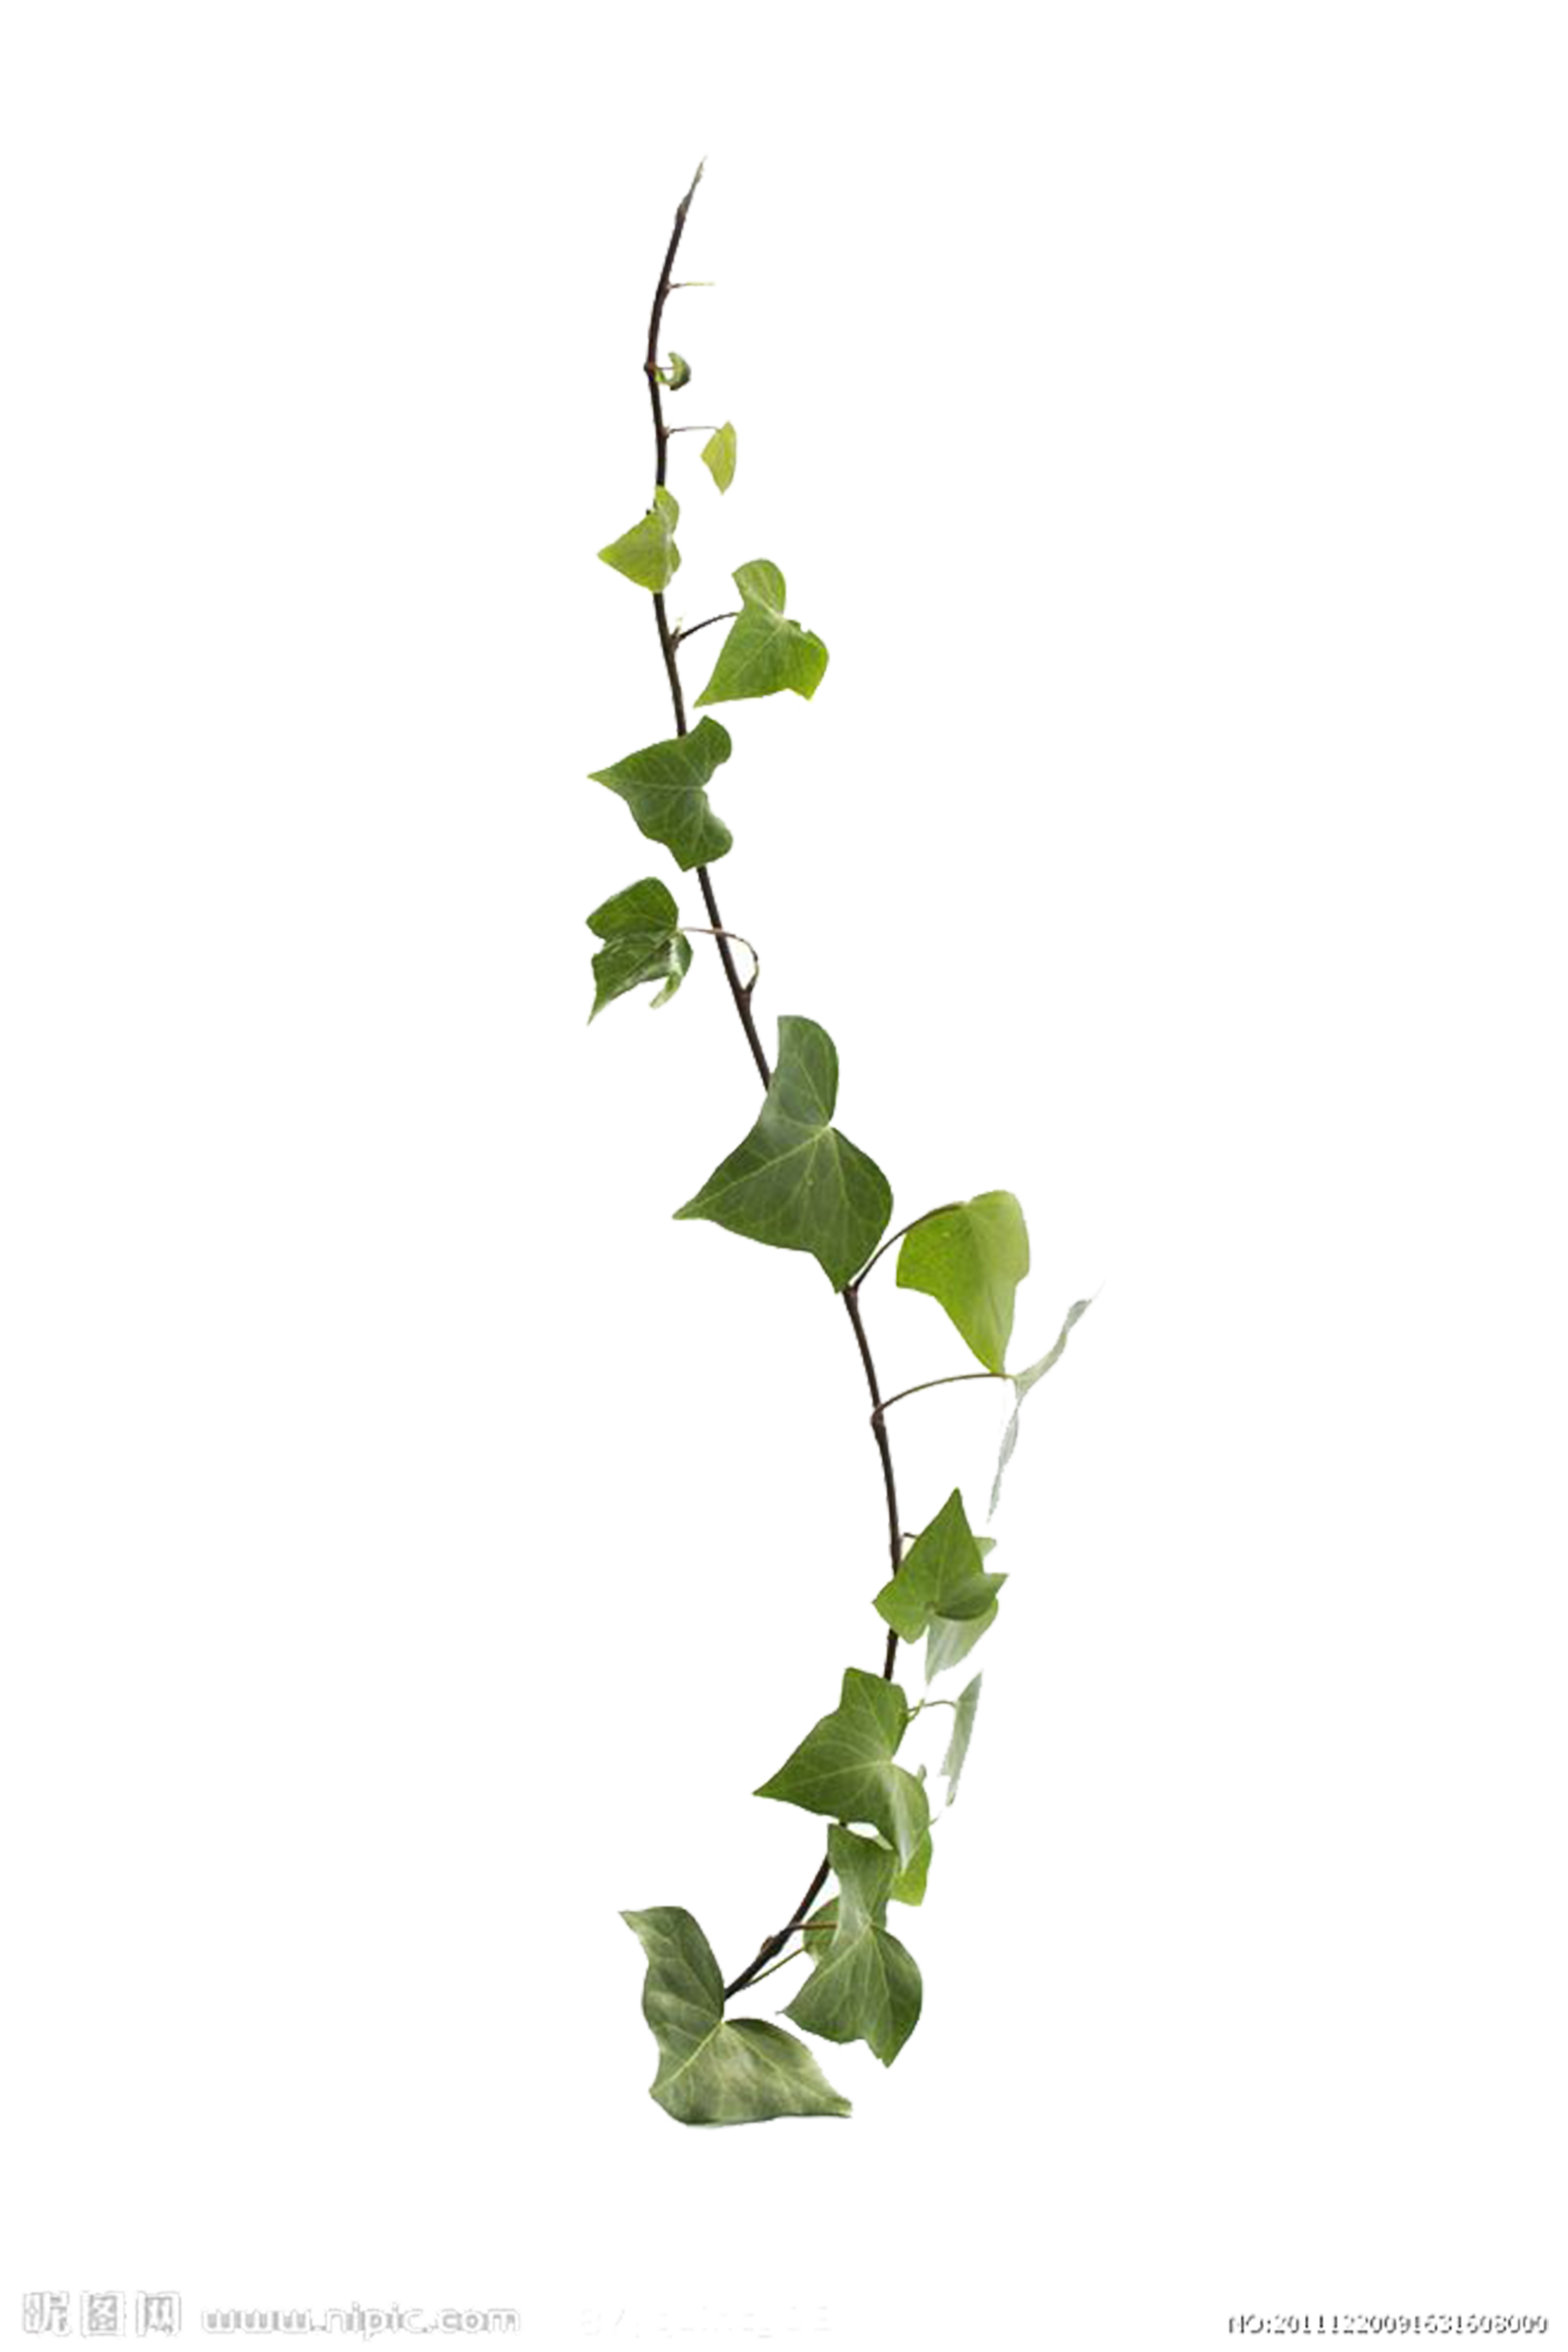 Common ivy Virginia creeper Vine Leaf Plant - Vines are available ...